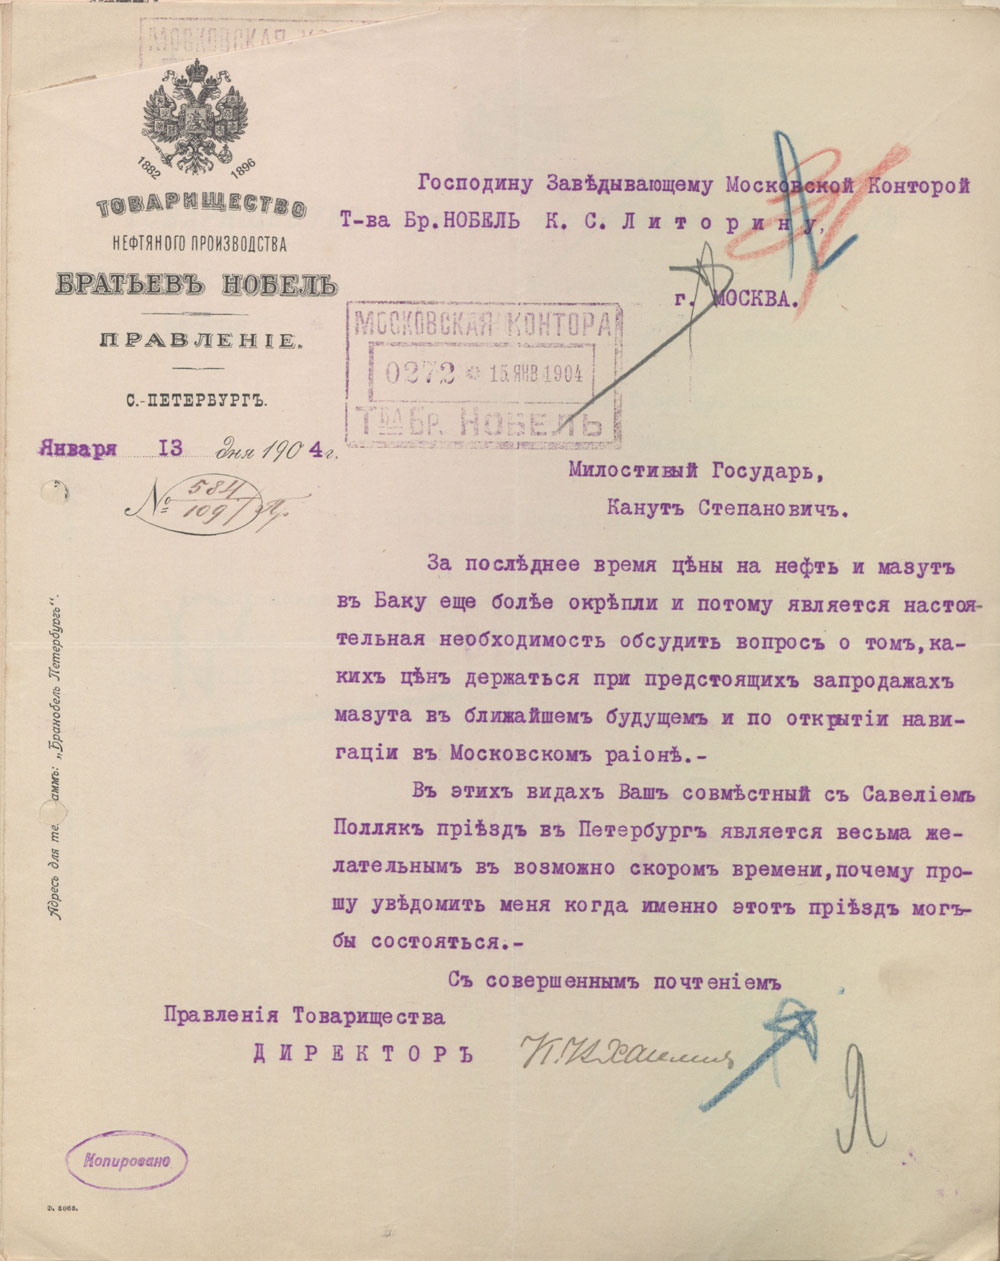 K.W. Hagelin’s letter to the head of the Moscow office C.S. Littorin. (Tzentralny istorichesky arkhiv Moskvy, Fond 355, opis 1, delo 103, list 31). The issue is oil and masut prices.